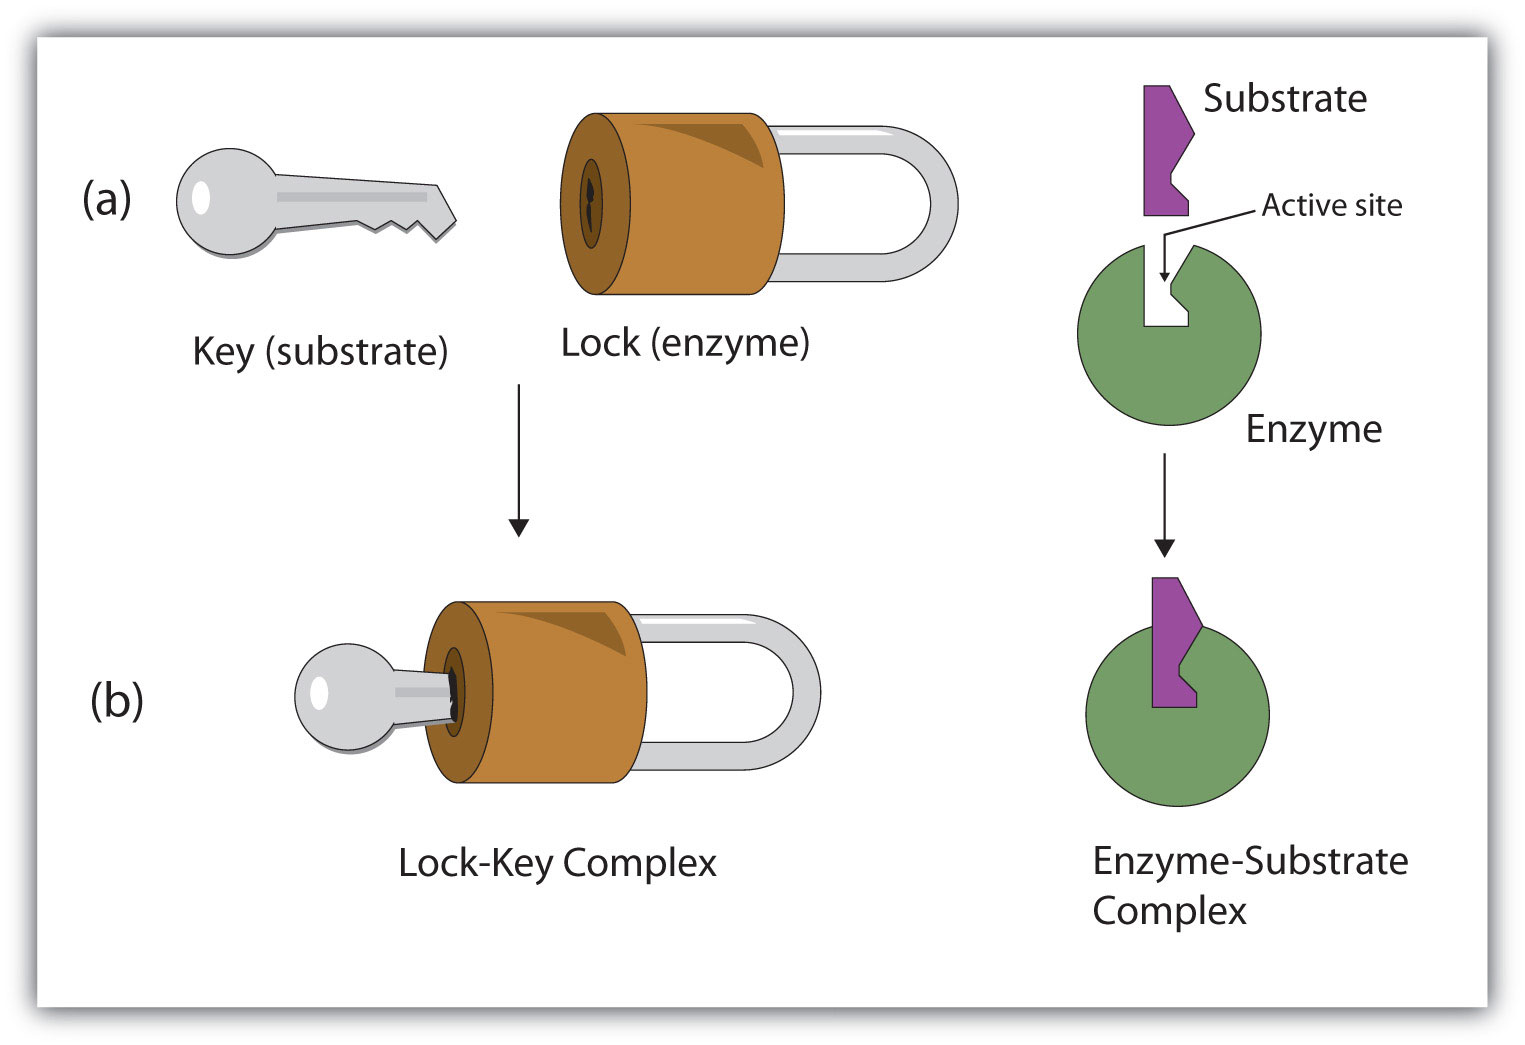 https://saylordotorg.github.io/text_the-basics-of-general-organic-and-biological-chemistry/s21-06-enzyme-action.html